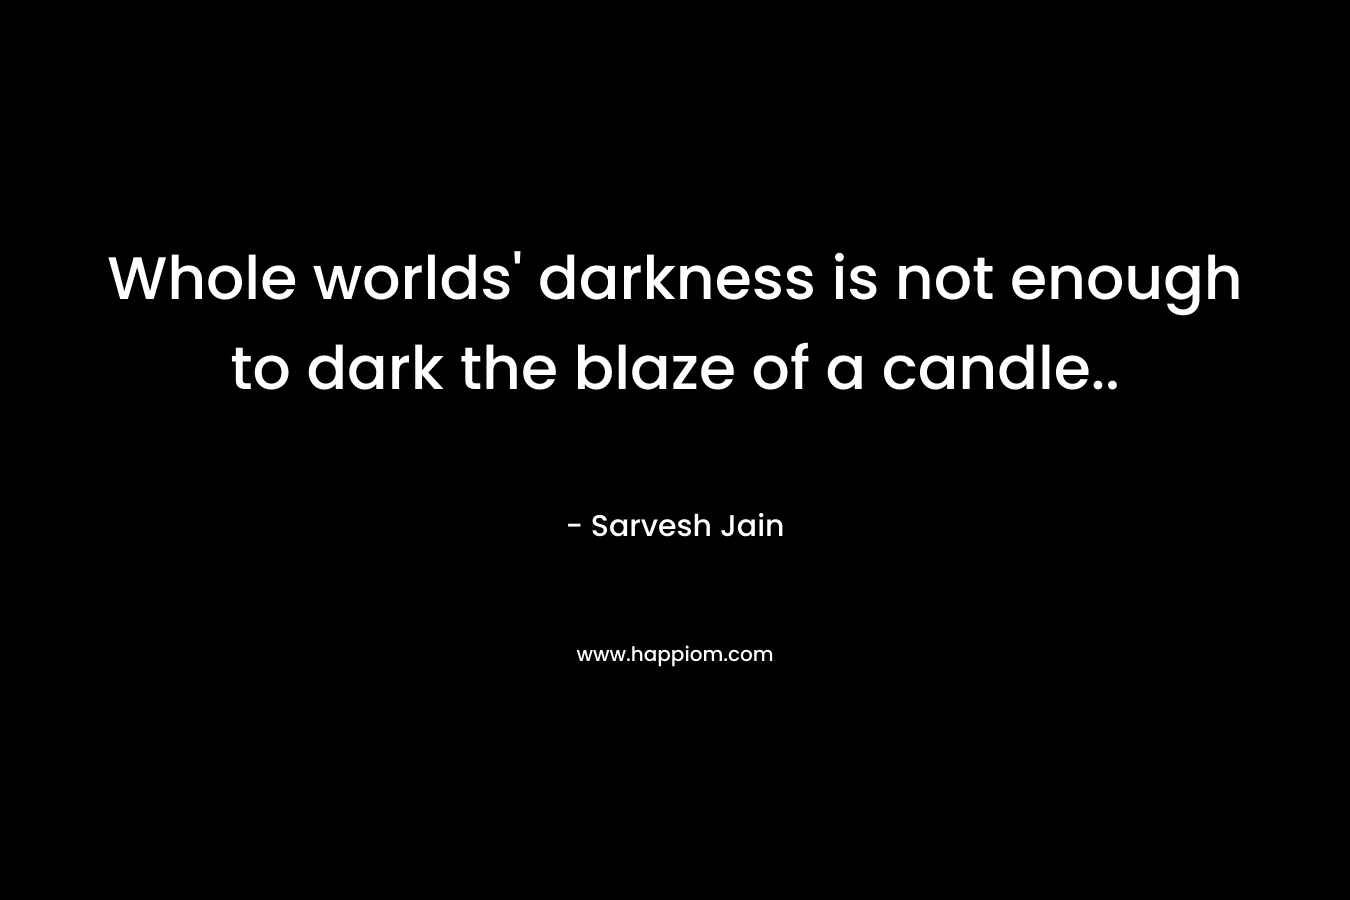 Whole worlds' darkness is not enough to dark the blaze of a candle..